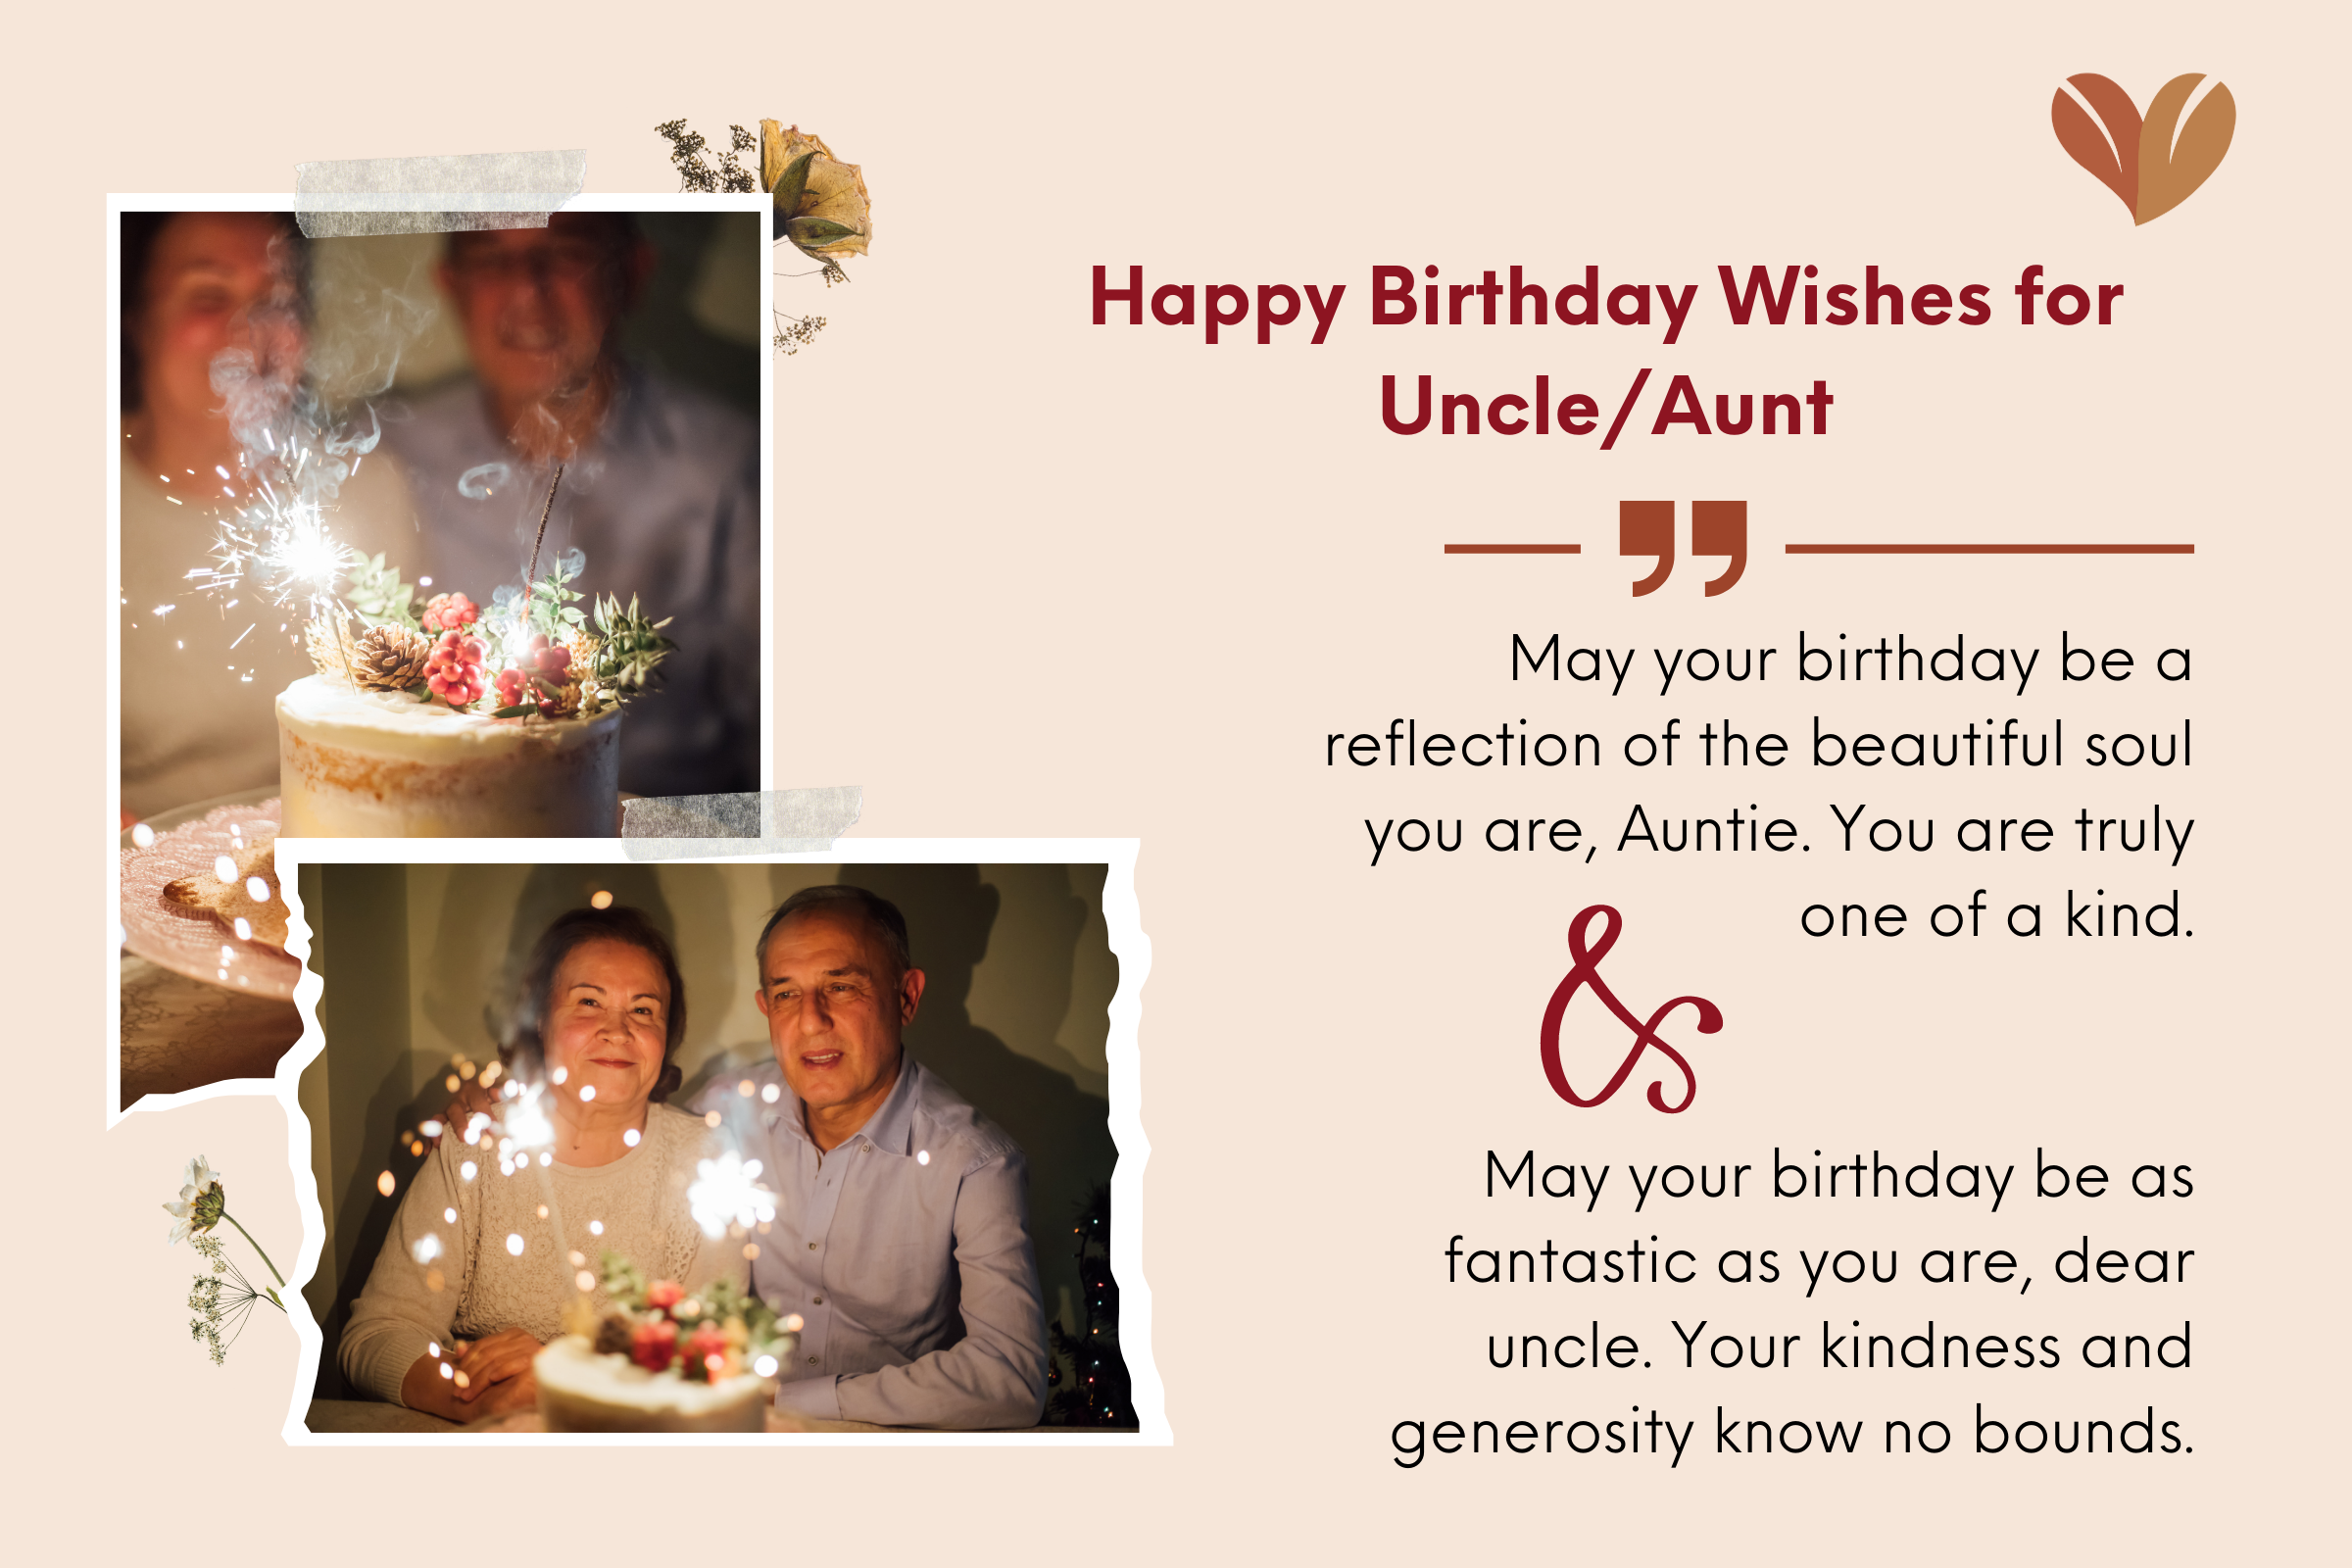 To the one who makes every day brighter, sending you heartfelt birthday wishes for a year of blessings